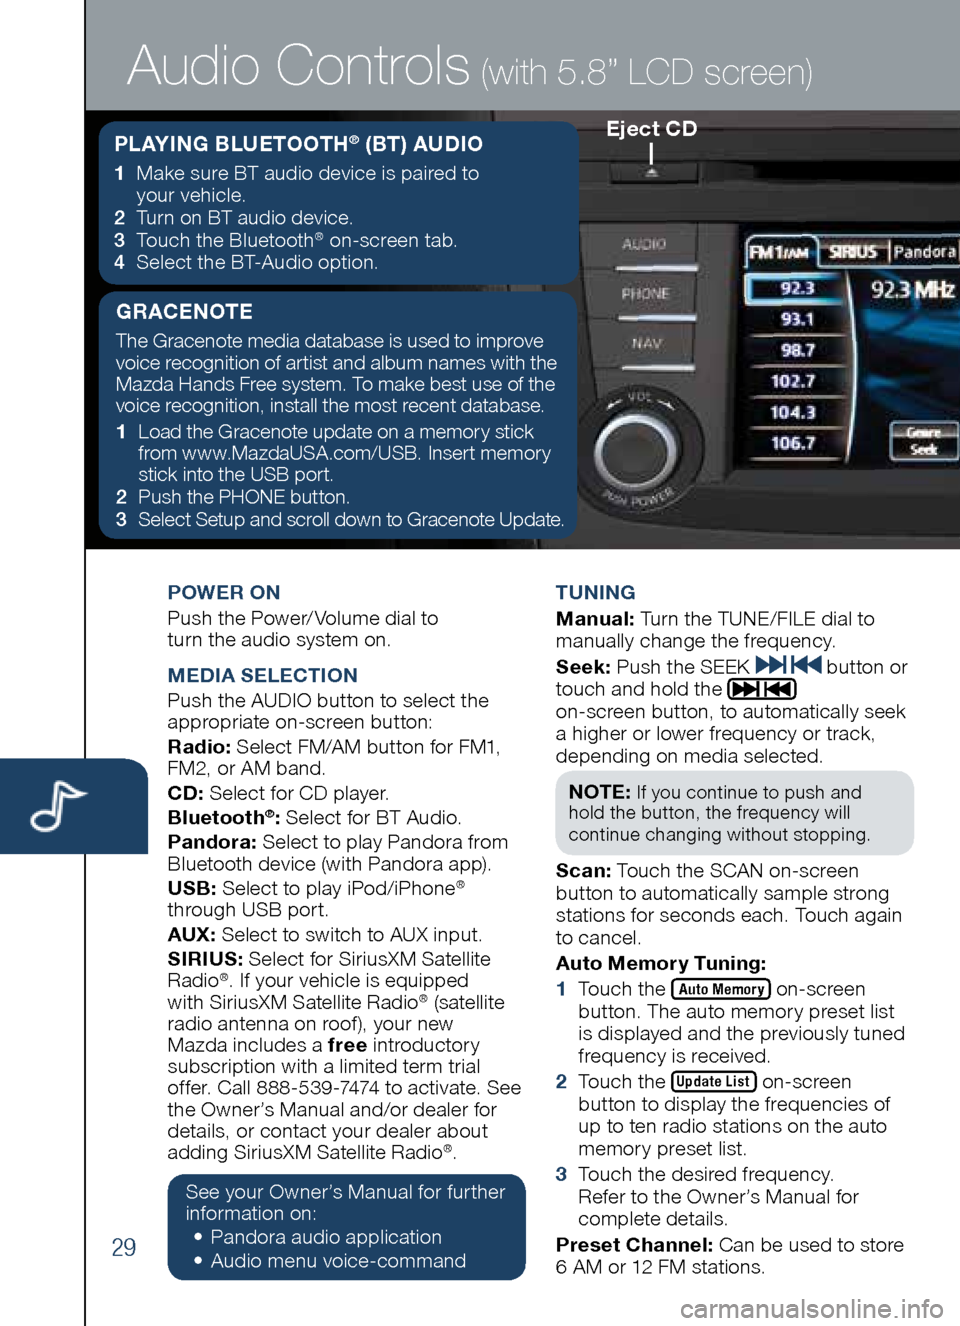 MAZDA MODEL CX-5 2014  Smart Start Guide (in English) 29
POWER ON 
Push	the	Power/ Volume	dial	to 		
turn	the	audio	system	on.
M EDIA  SELECTION
Push	the	AUDIO	button	to	select	the 	
appropriate	on-screen	button:
Radio: 	Select	FM/AM	button	for	FM1, 	
FM